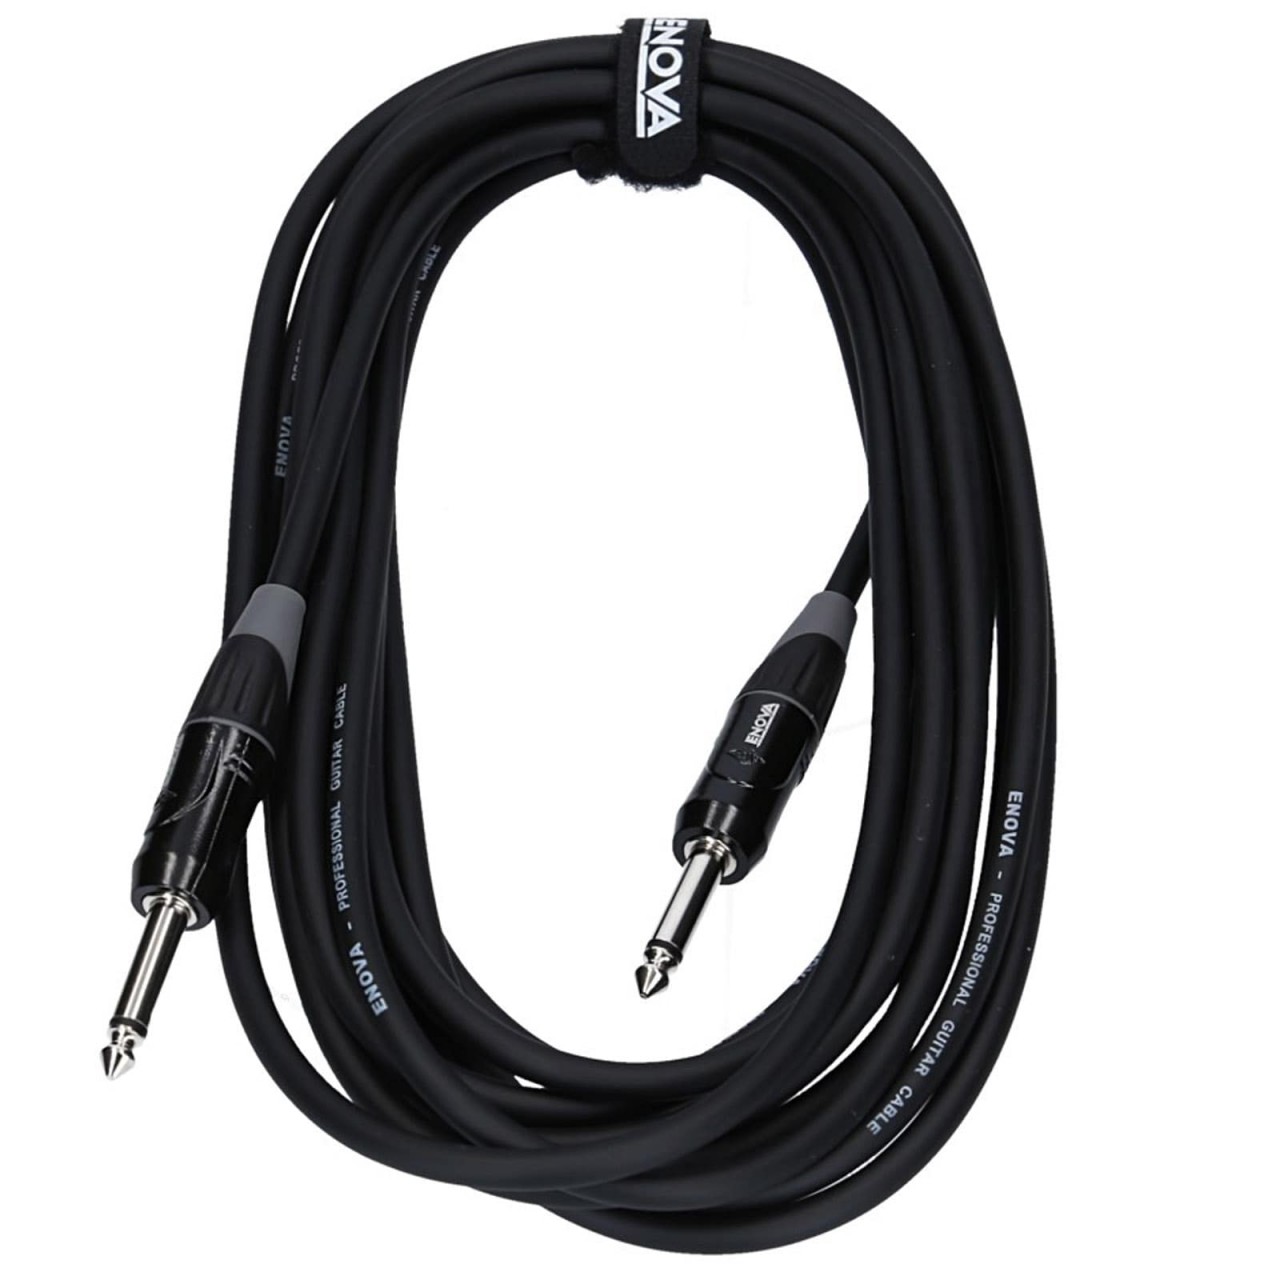 7 meter instrument cable with 2x 6.3mm jack connectors